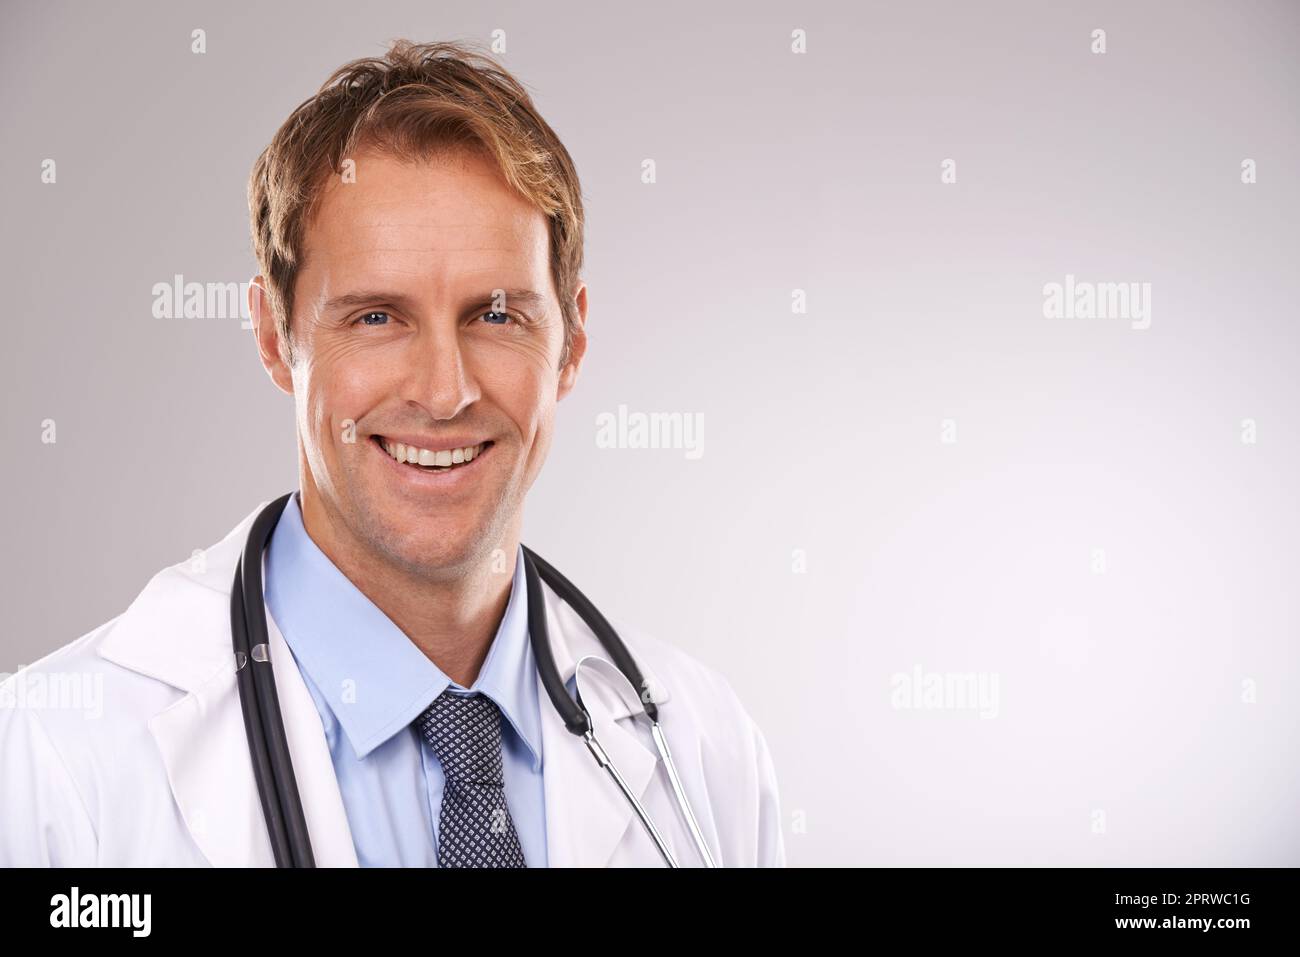 Your health makes him happy. Cropped studio portrait of a handsome young male doctor. Stock Photo